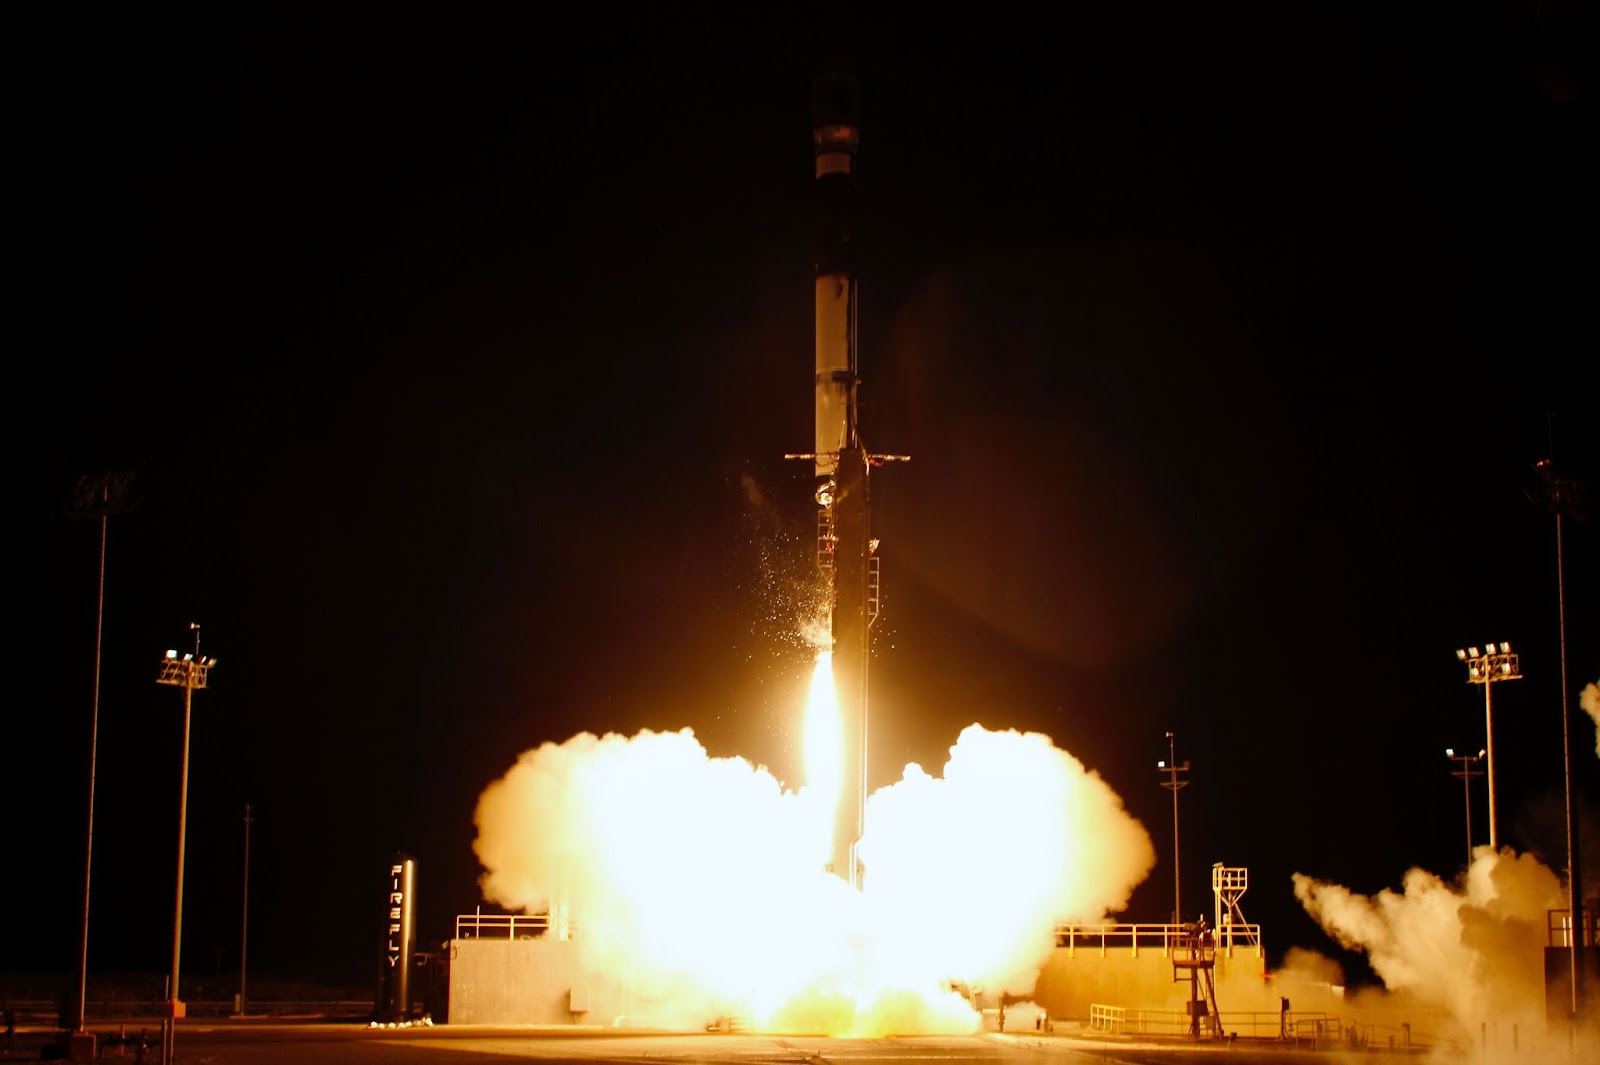 The VICTUS NOX mission launching from Vandenberg Space Force Base.